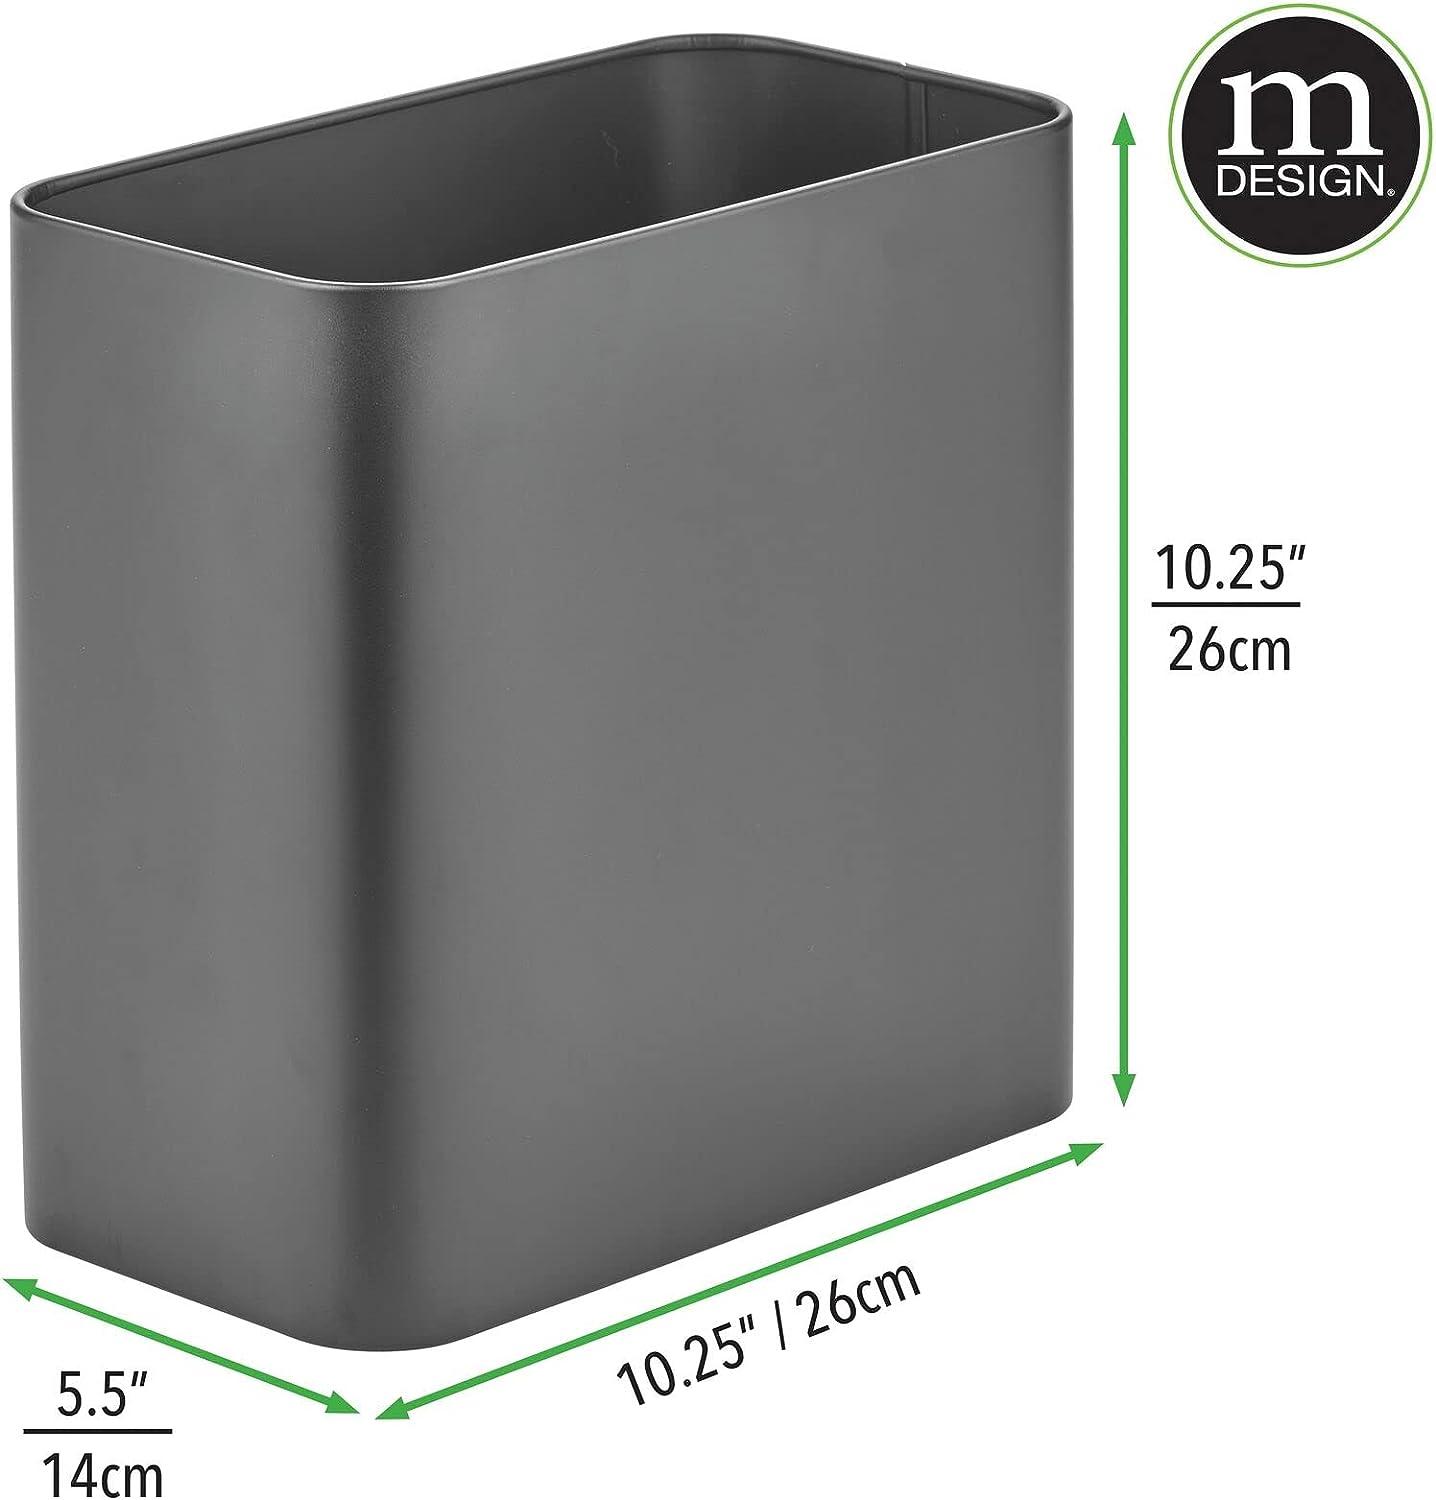 mDesign Steel/Plastic Toilet Bowl Brush/Holder and Rectangular 2.2 Gallon  Garbage Can Combo Set for Bathroom Holds Trash, Recycling, Deep Cleaning,  Mirri Collection - Set of 2 - Graphite Gray